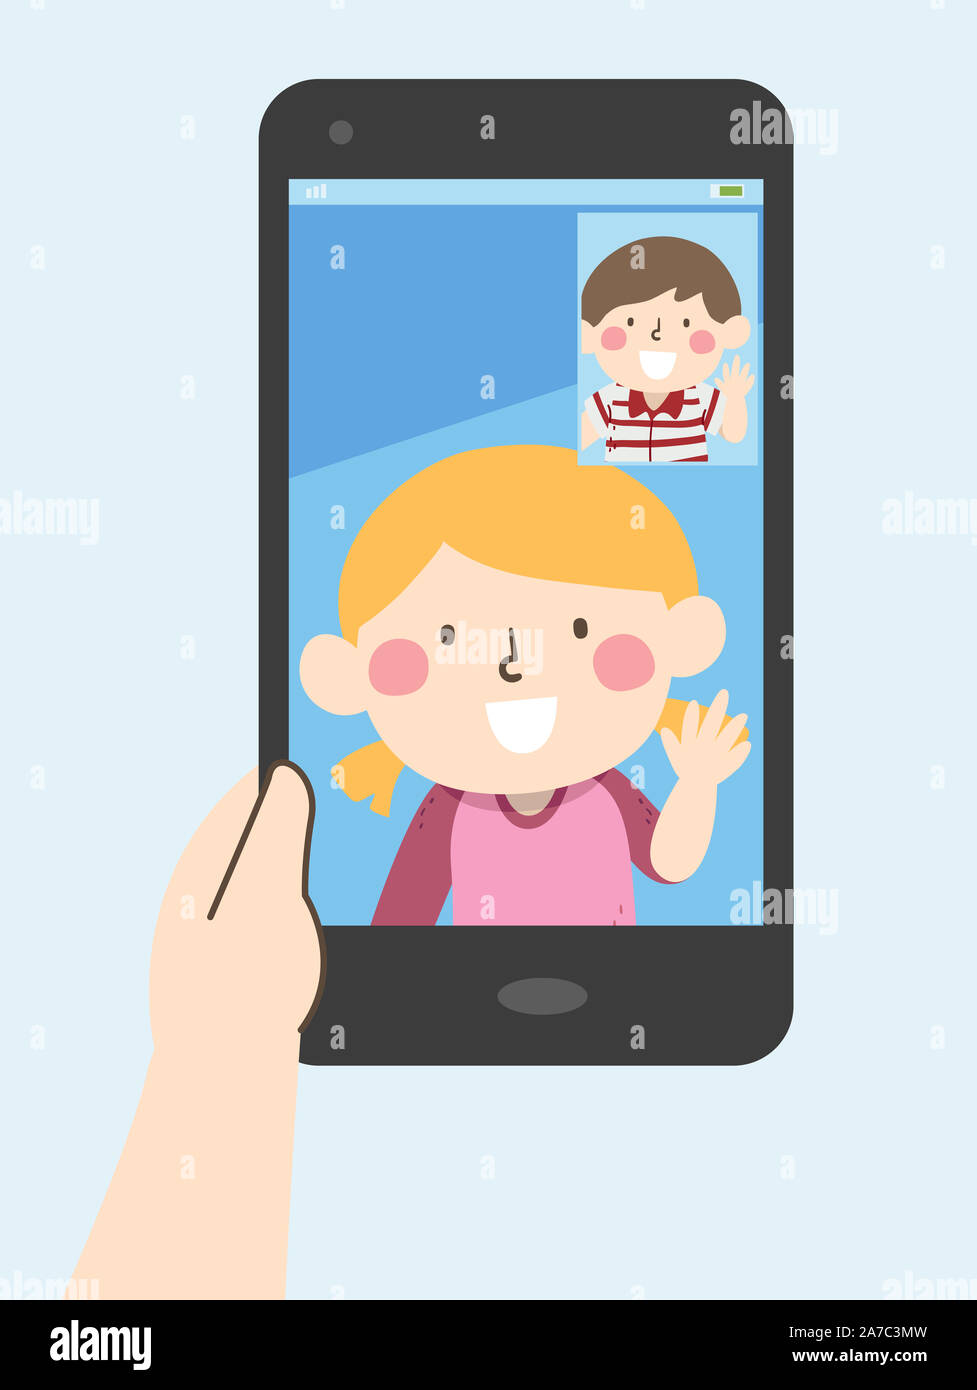 Illustration Of Kids Using Mobile Phone For A Video Call Stock Photo Alamy